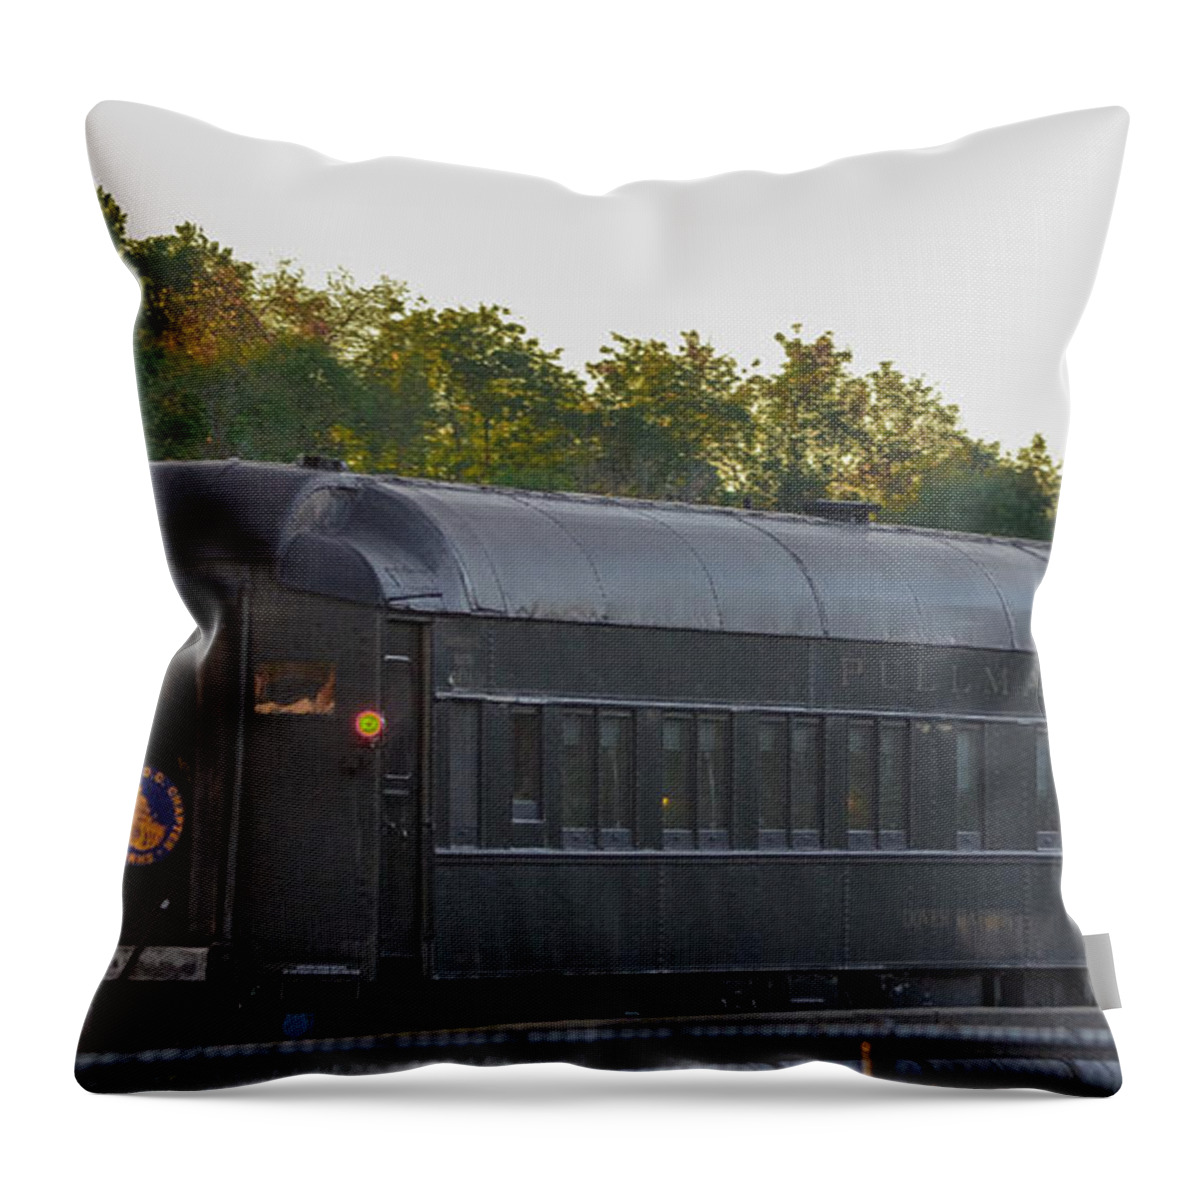 Car Throw Pillow featuring the photograph Pullman Dover Harbor Passenger by Jeff at JSJ Photography